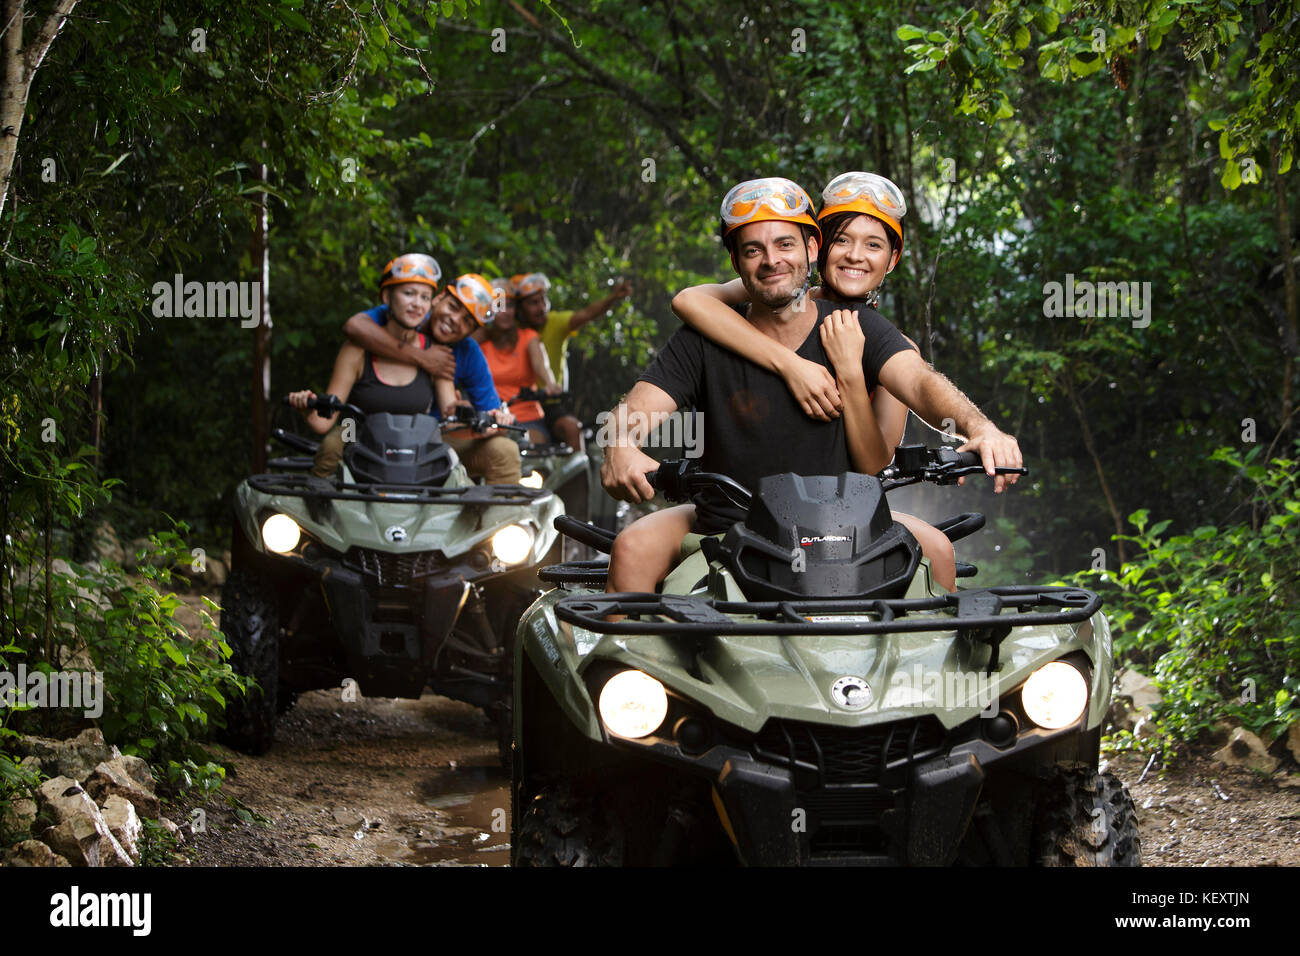 Couples embracing while riding quad bikes in Emotions Native Park, Quintana Roo, Mexico Stock Photo